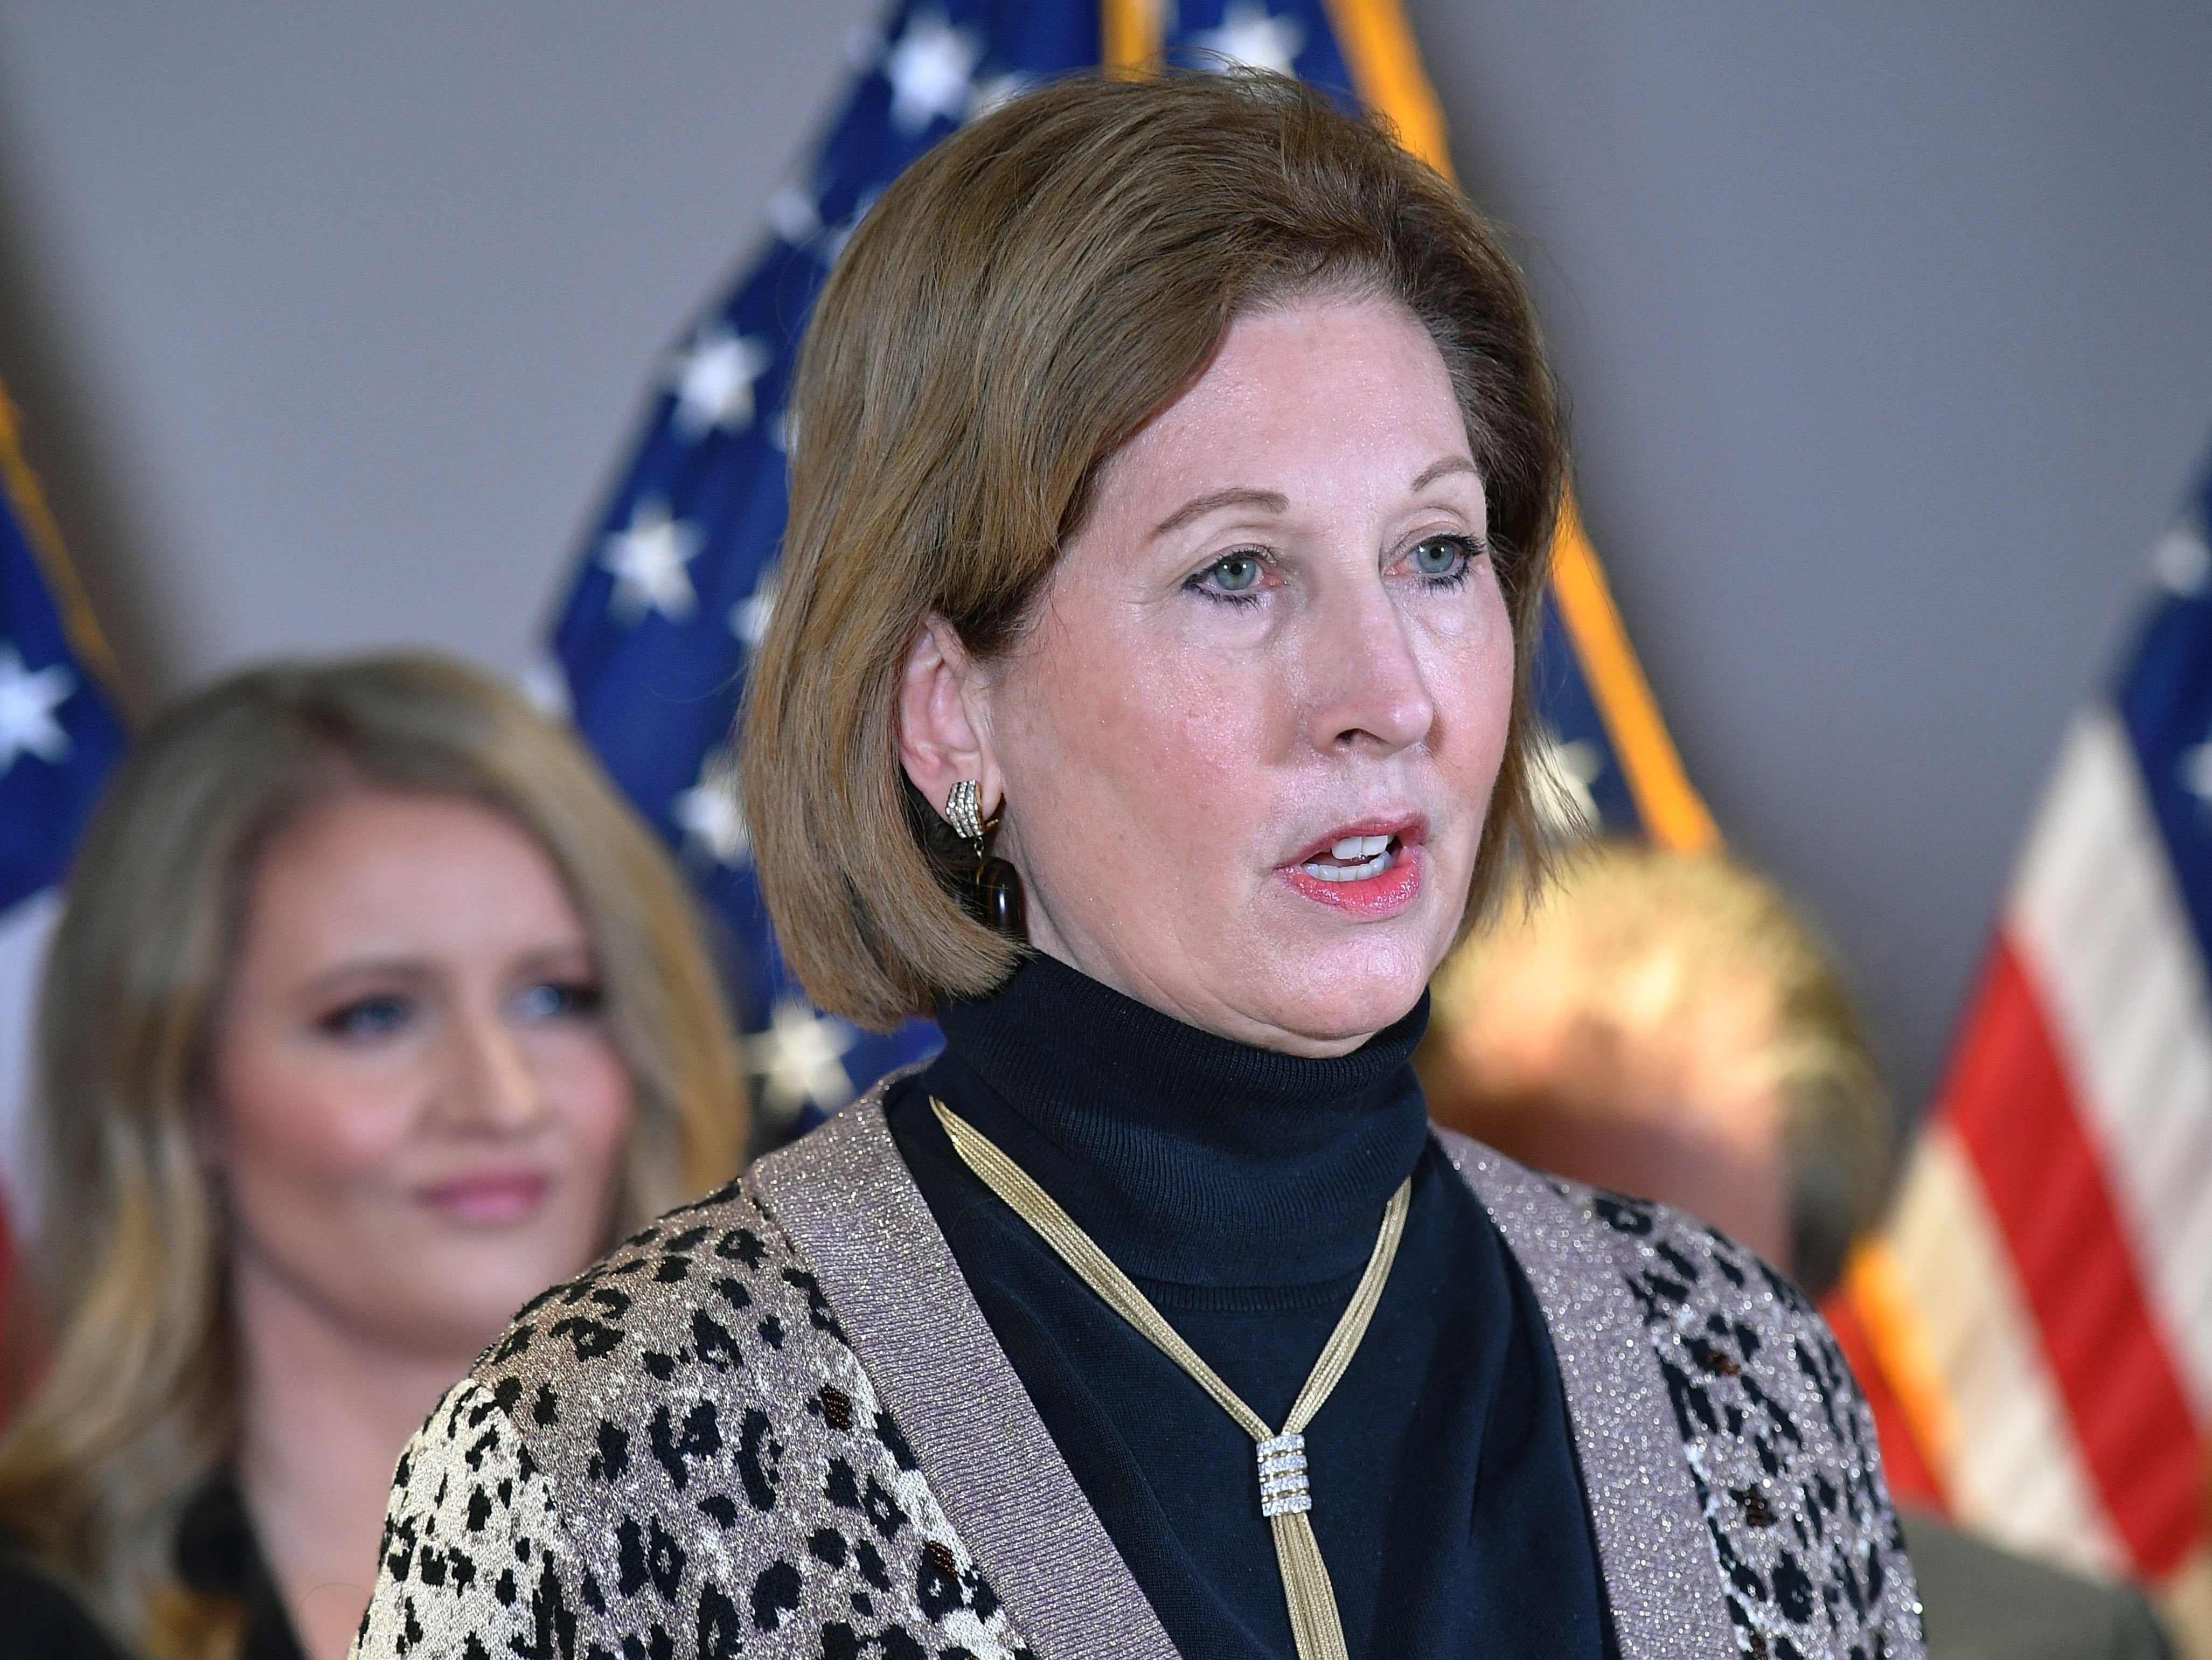 A November 19, 2020 photo shows Sidney Powell speaking during a press conference at the Republican National Committee headquarters in Washington, DC